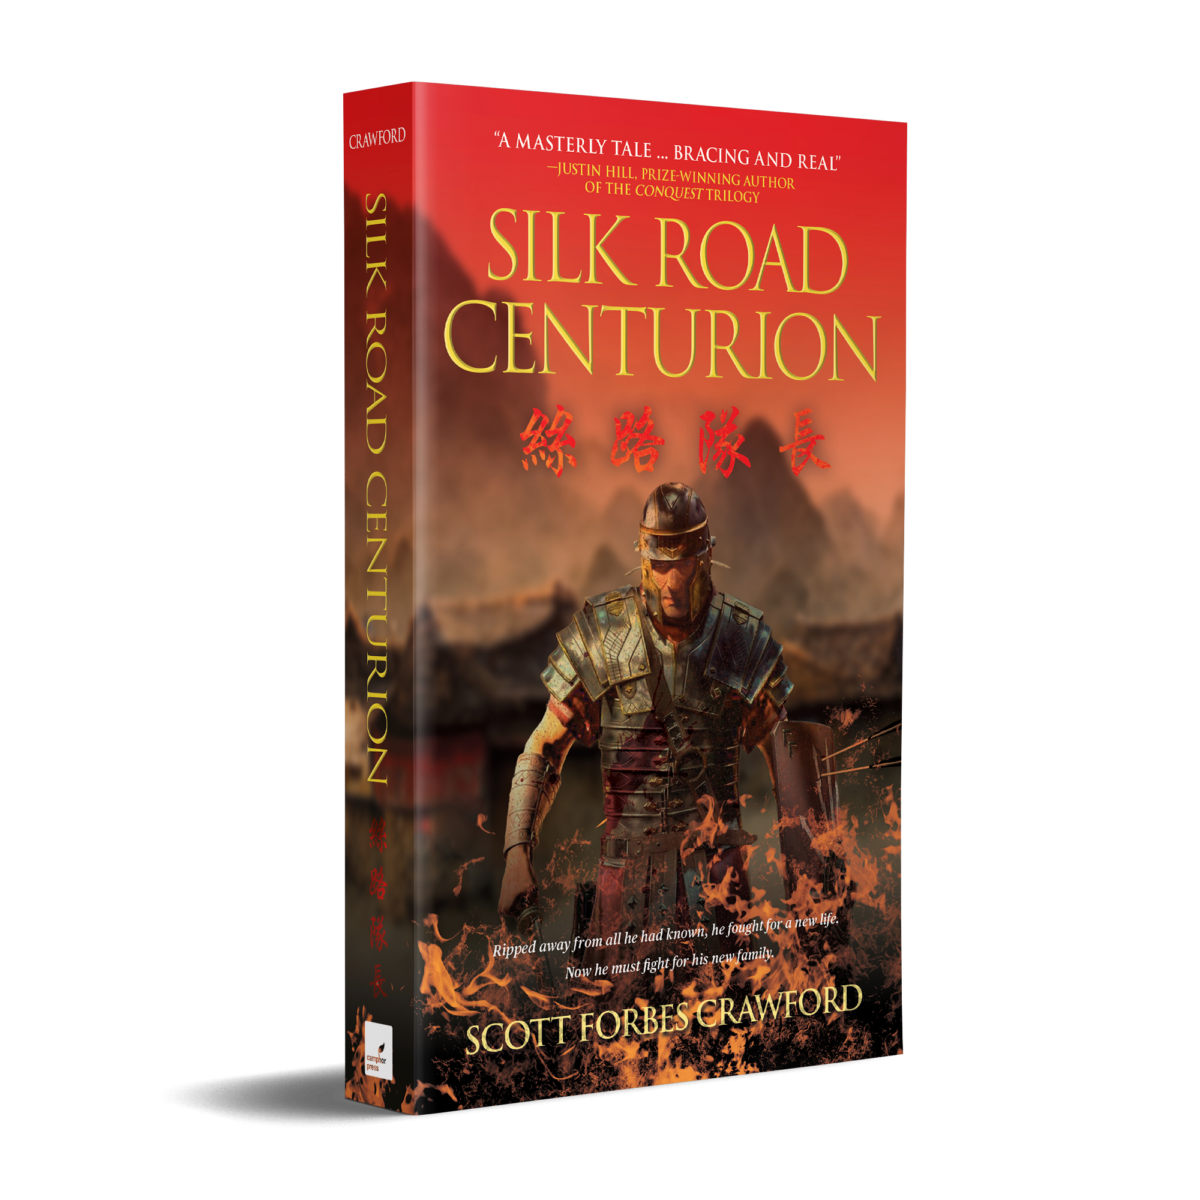 The paperback of Silk Road Centurion, by Scott Forbes Crawford